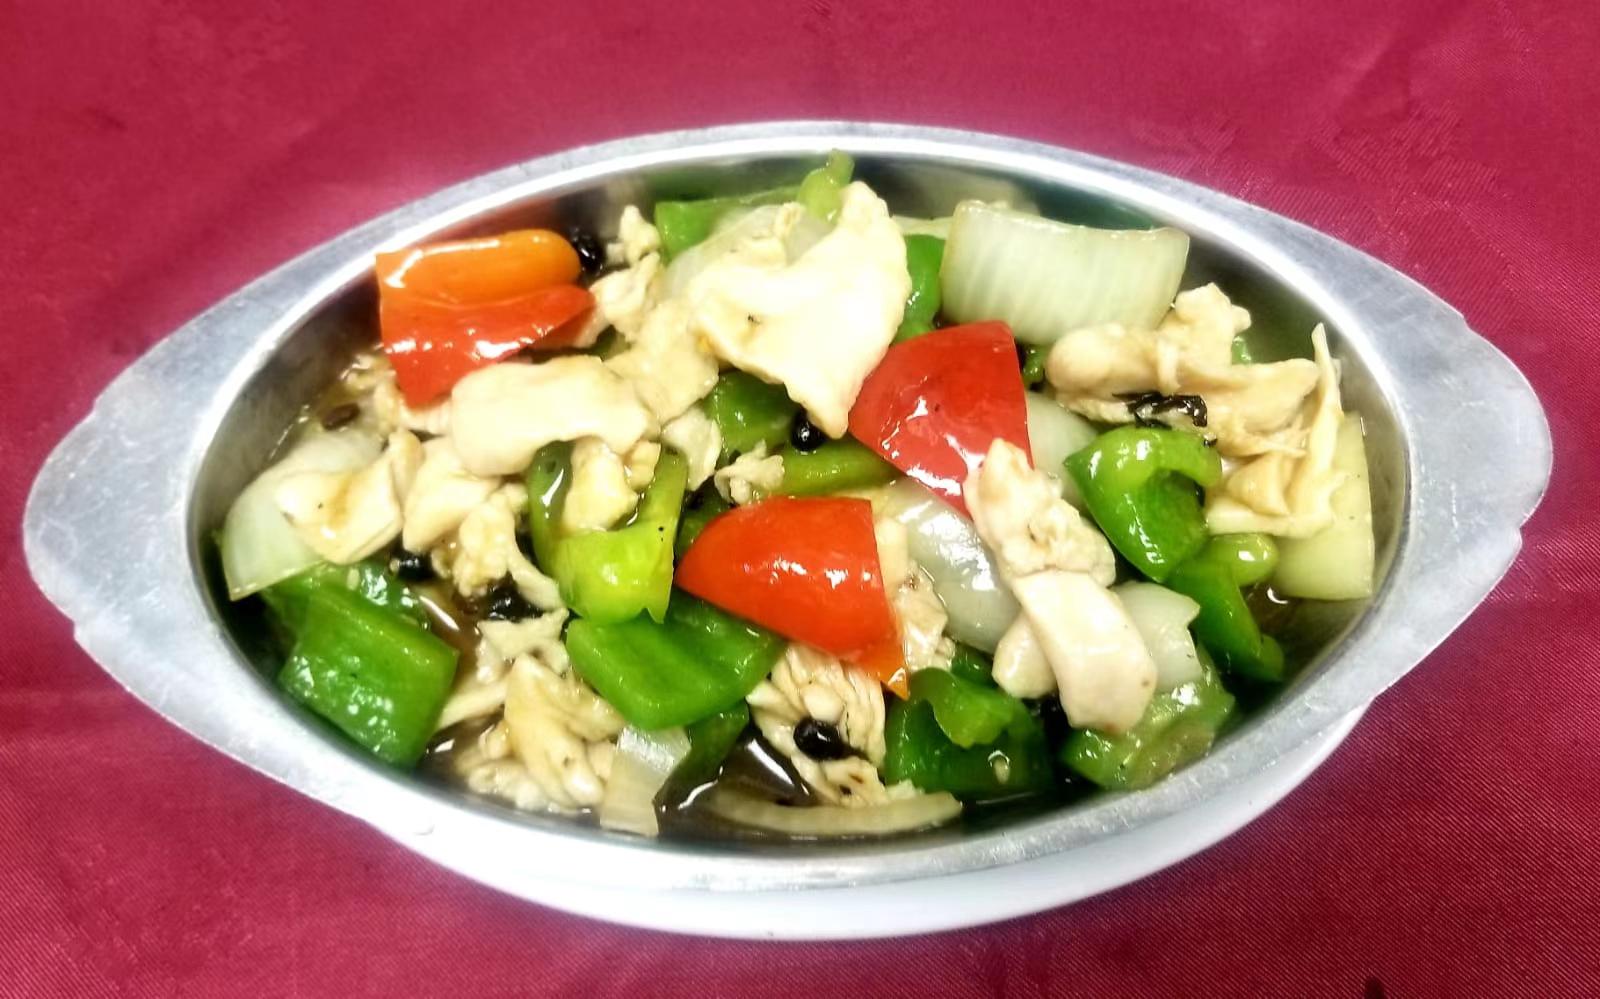 136. Sizzling Chicken with Green Pepper and Black Bean